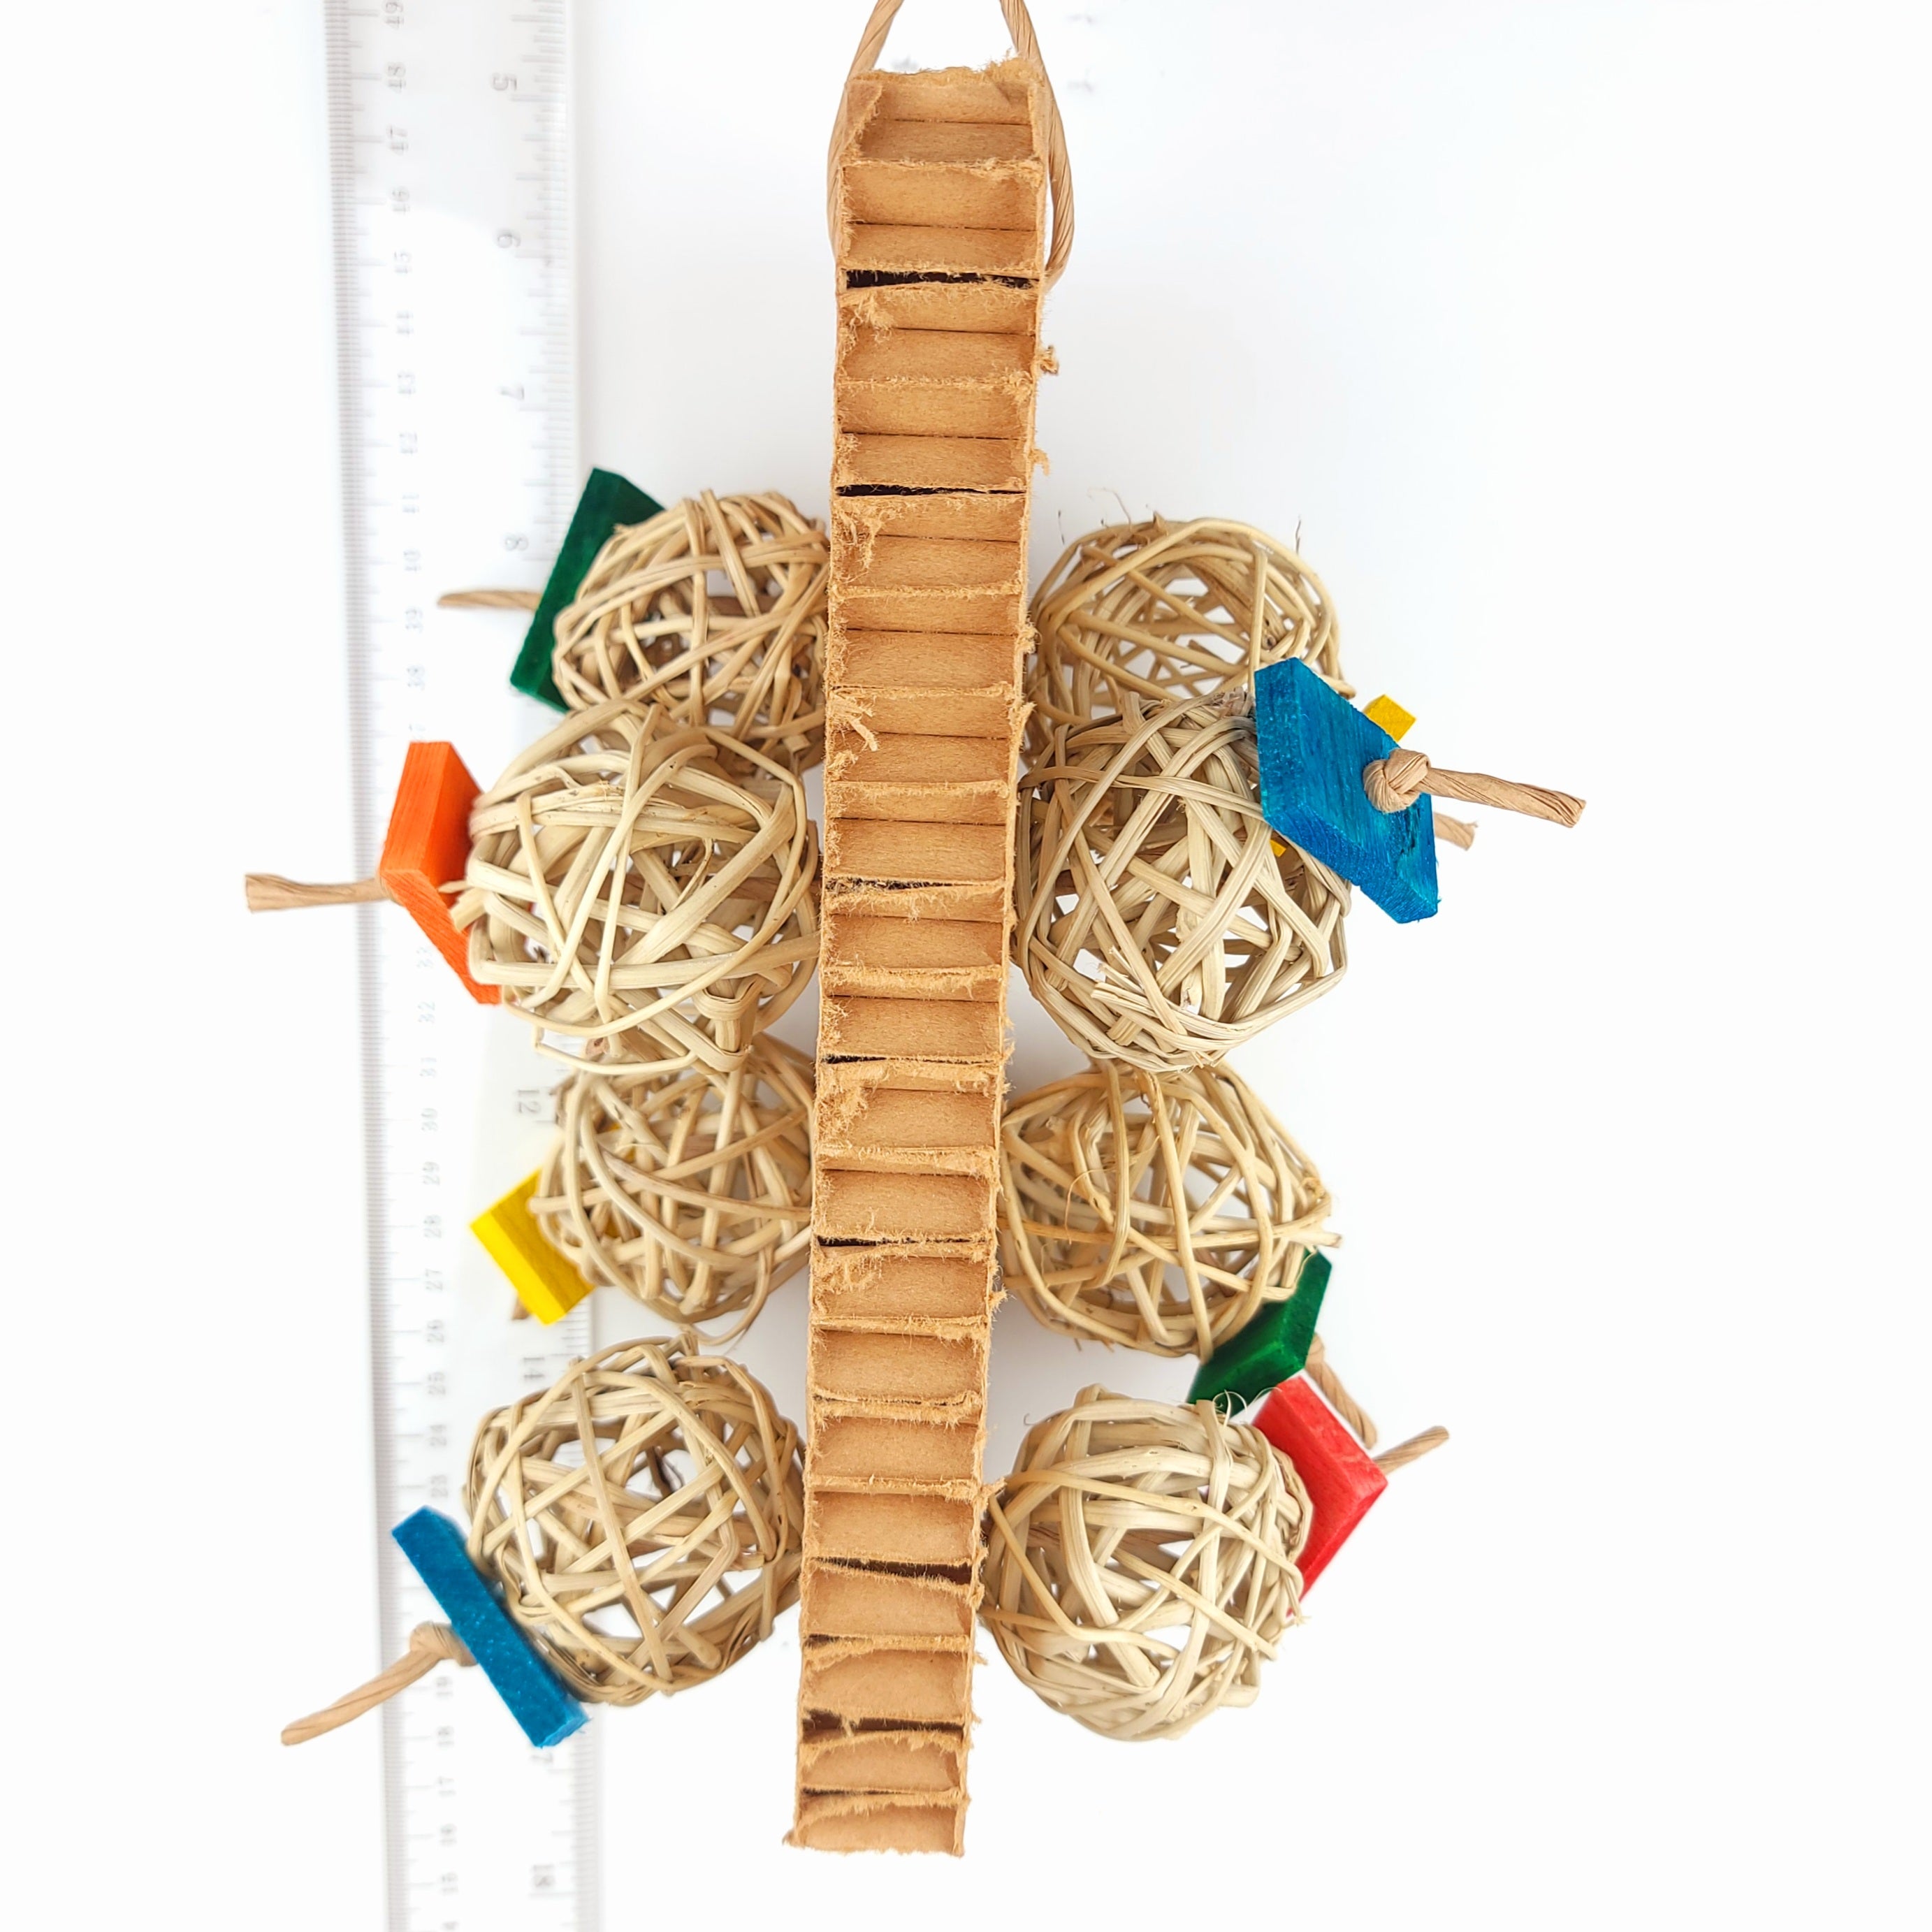 Paddle Ball - Single Size - by Cheep Thrills Bird Toys